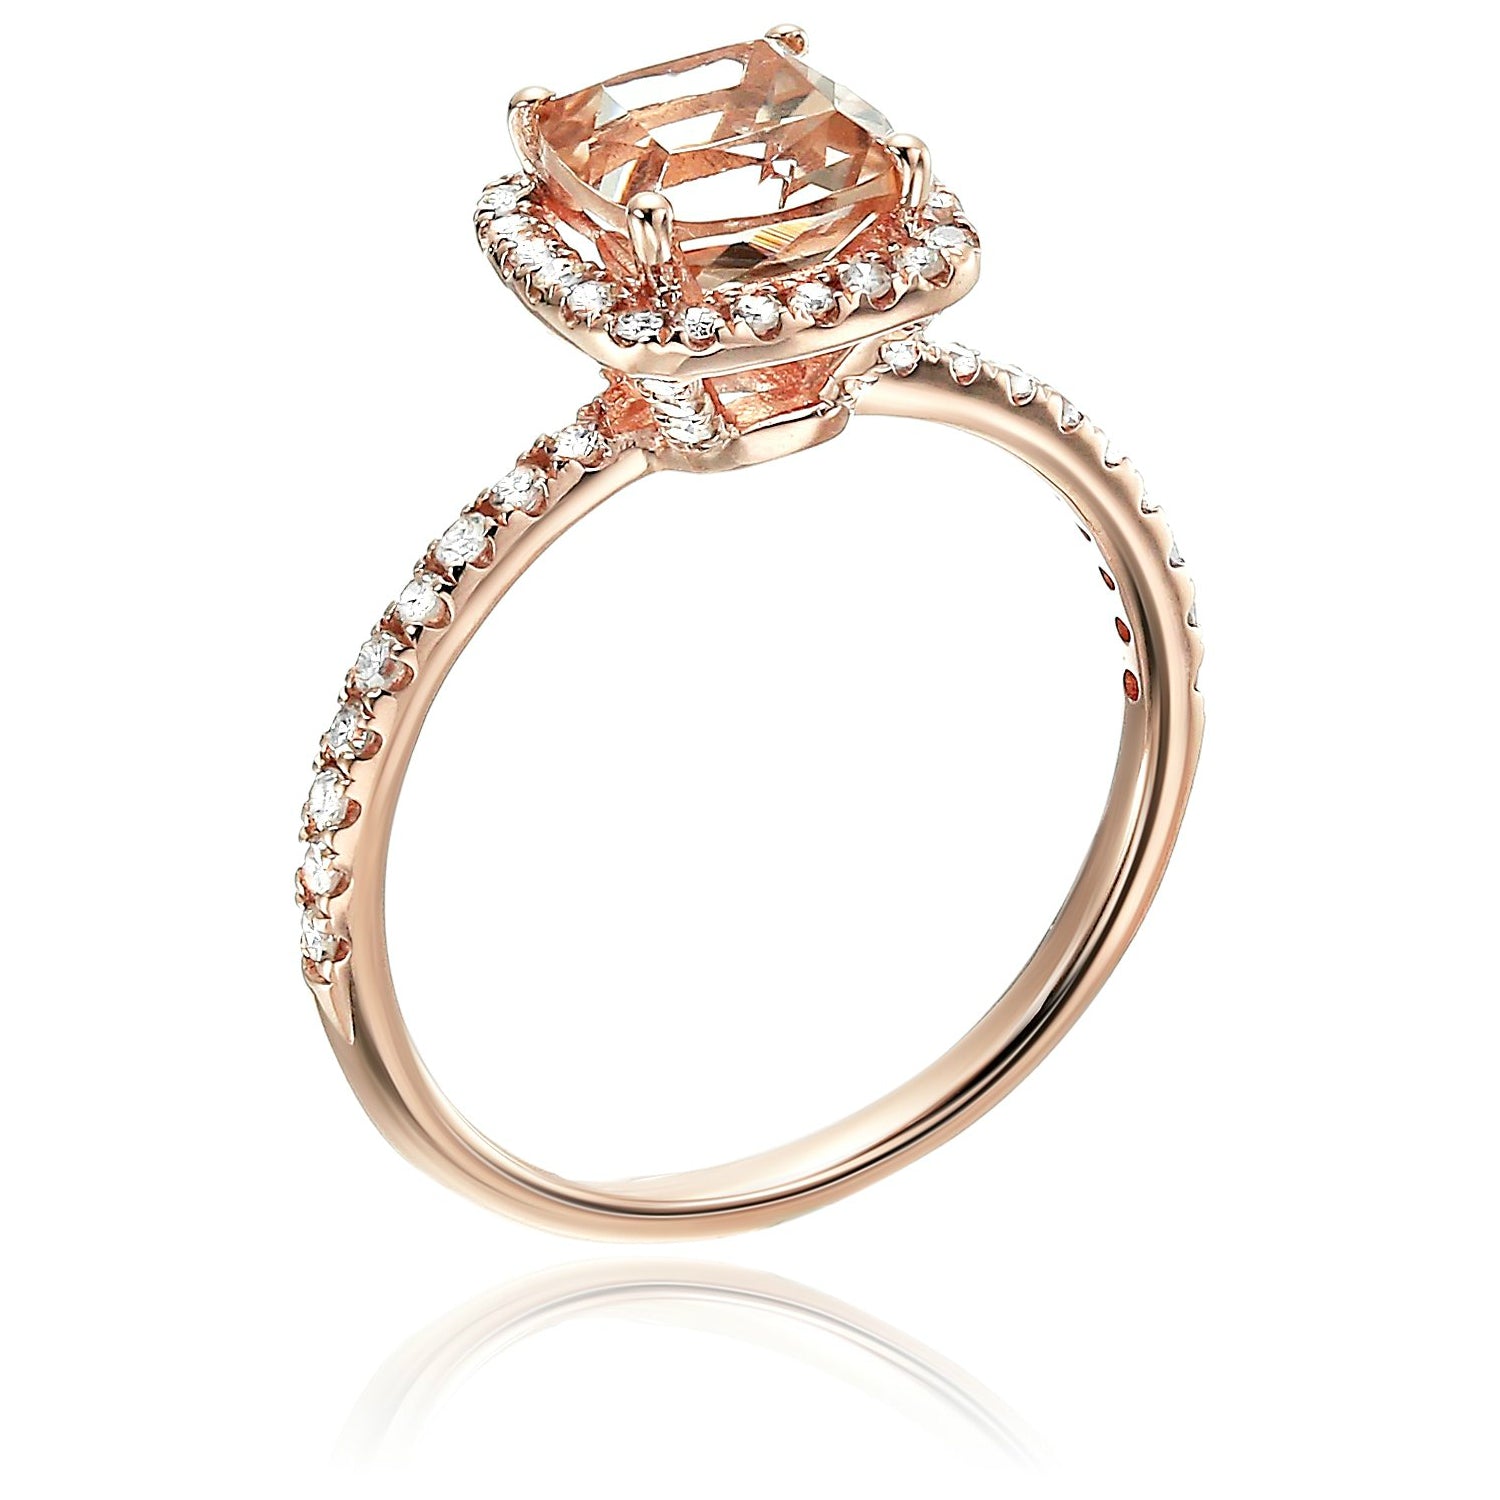 10k Rose Gold Morganite and Diamond Cushion Halo Engagement Ring (1/4cttw, H-I Color, SI1-SI2 Clarity), - pinctore